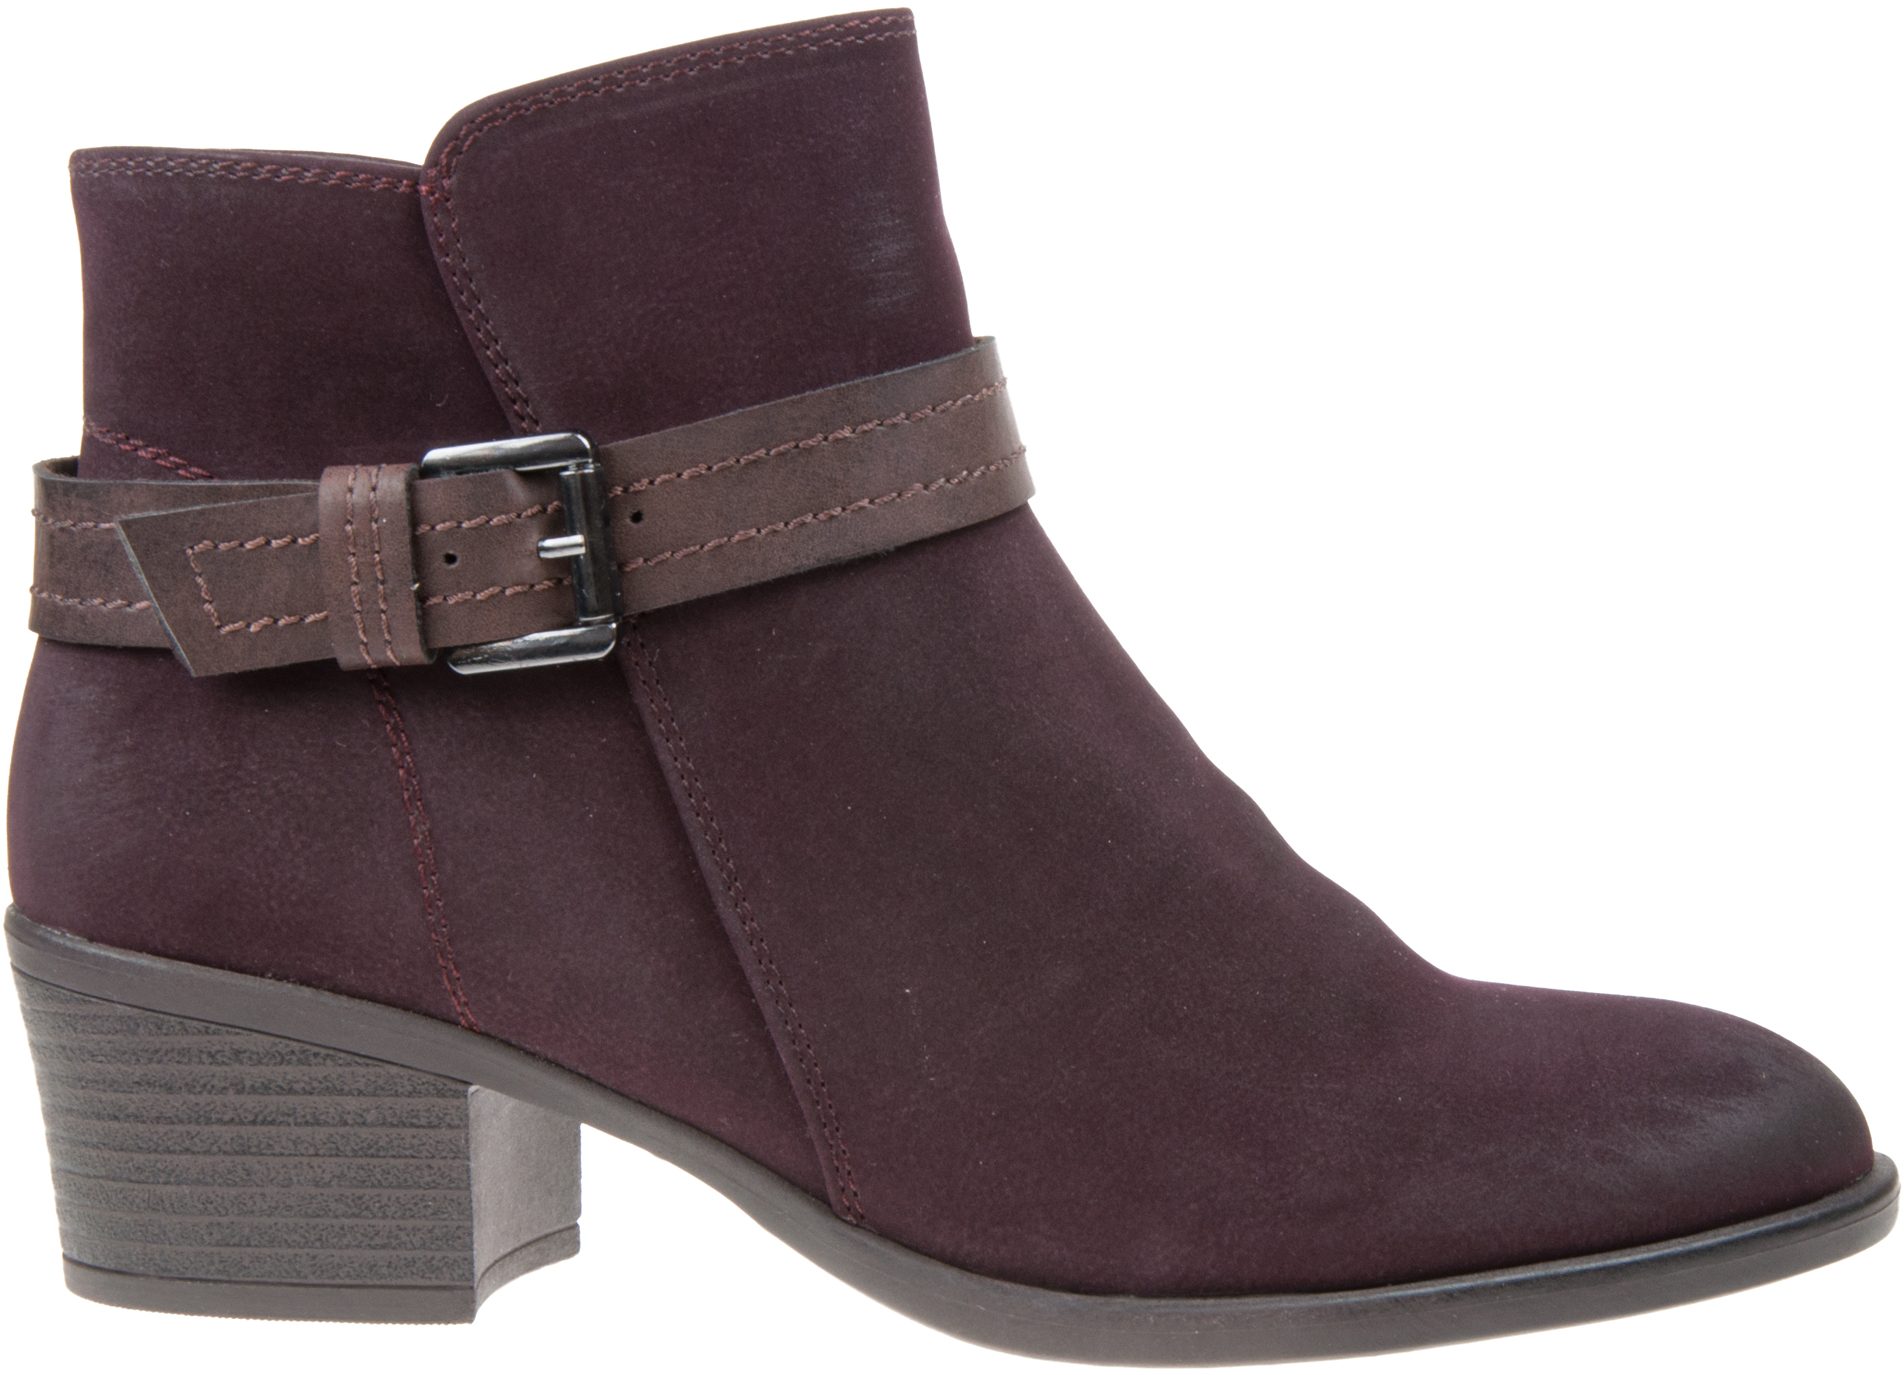 Heavenly Feet Daisy Deep Burgundy - Ankle Boots - Humphries Shoes